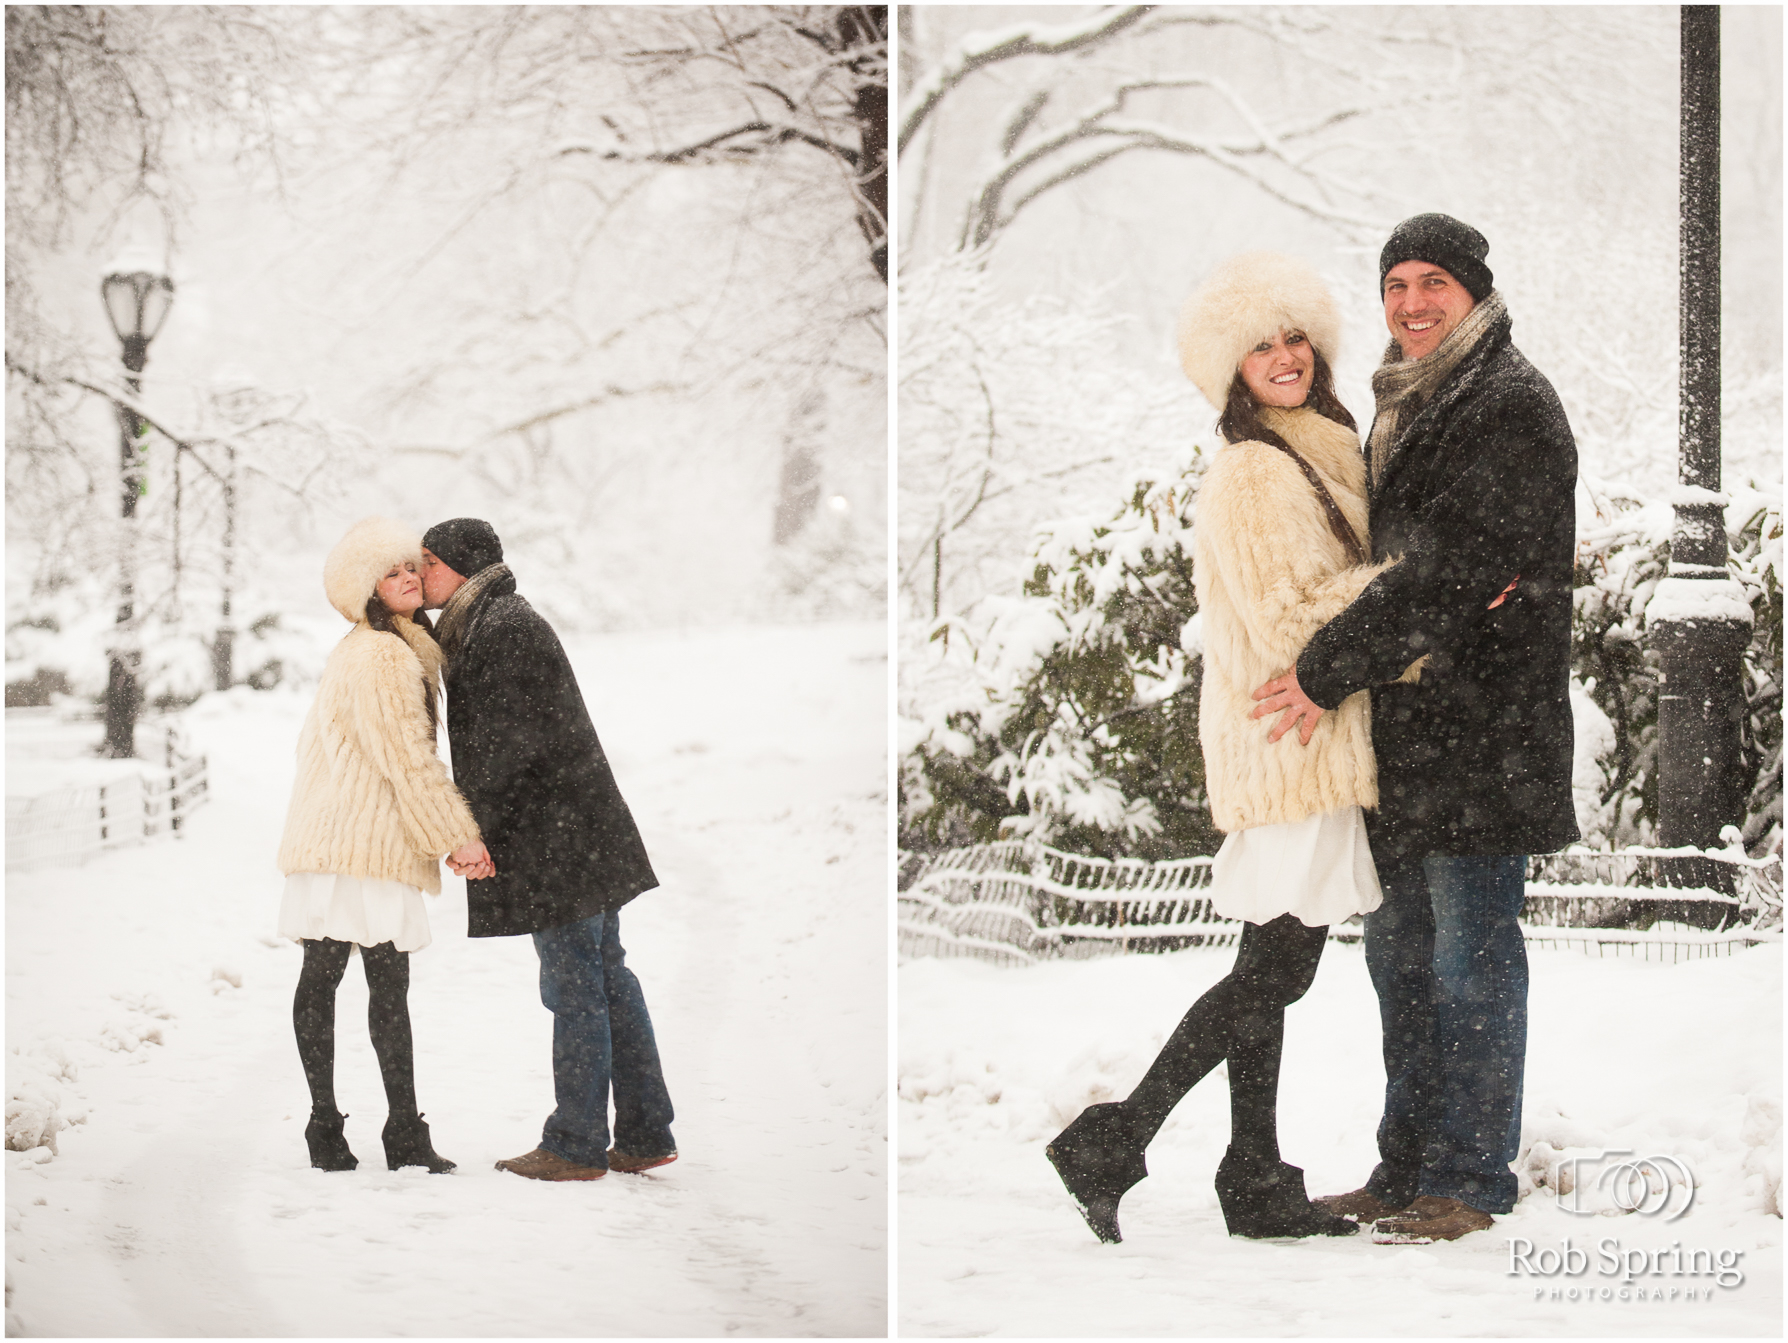 Snowy Central Park Engagement Session